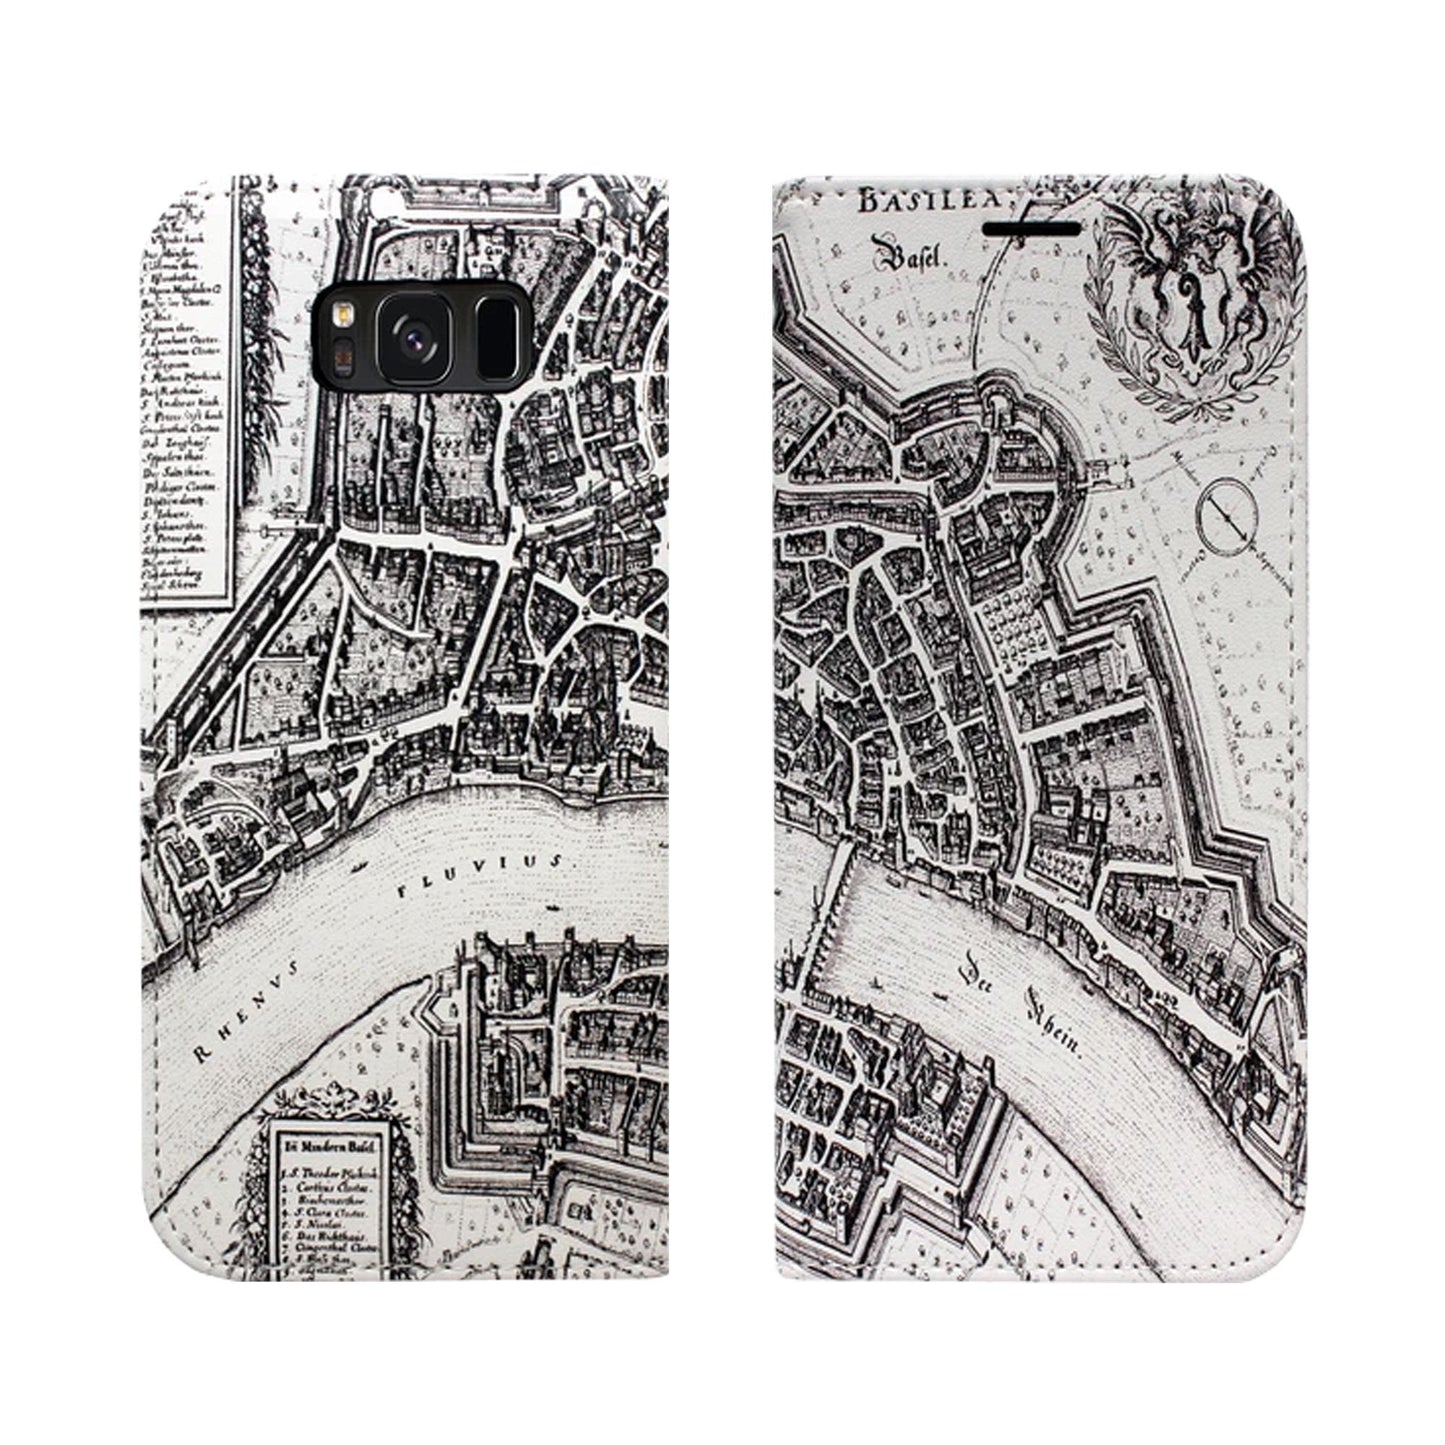 Basel Merian Panorama Case for iPhone, Samsung and Huawei